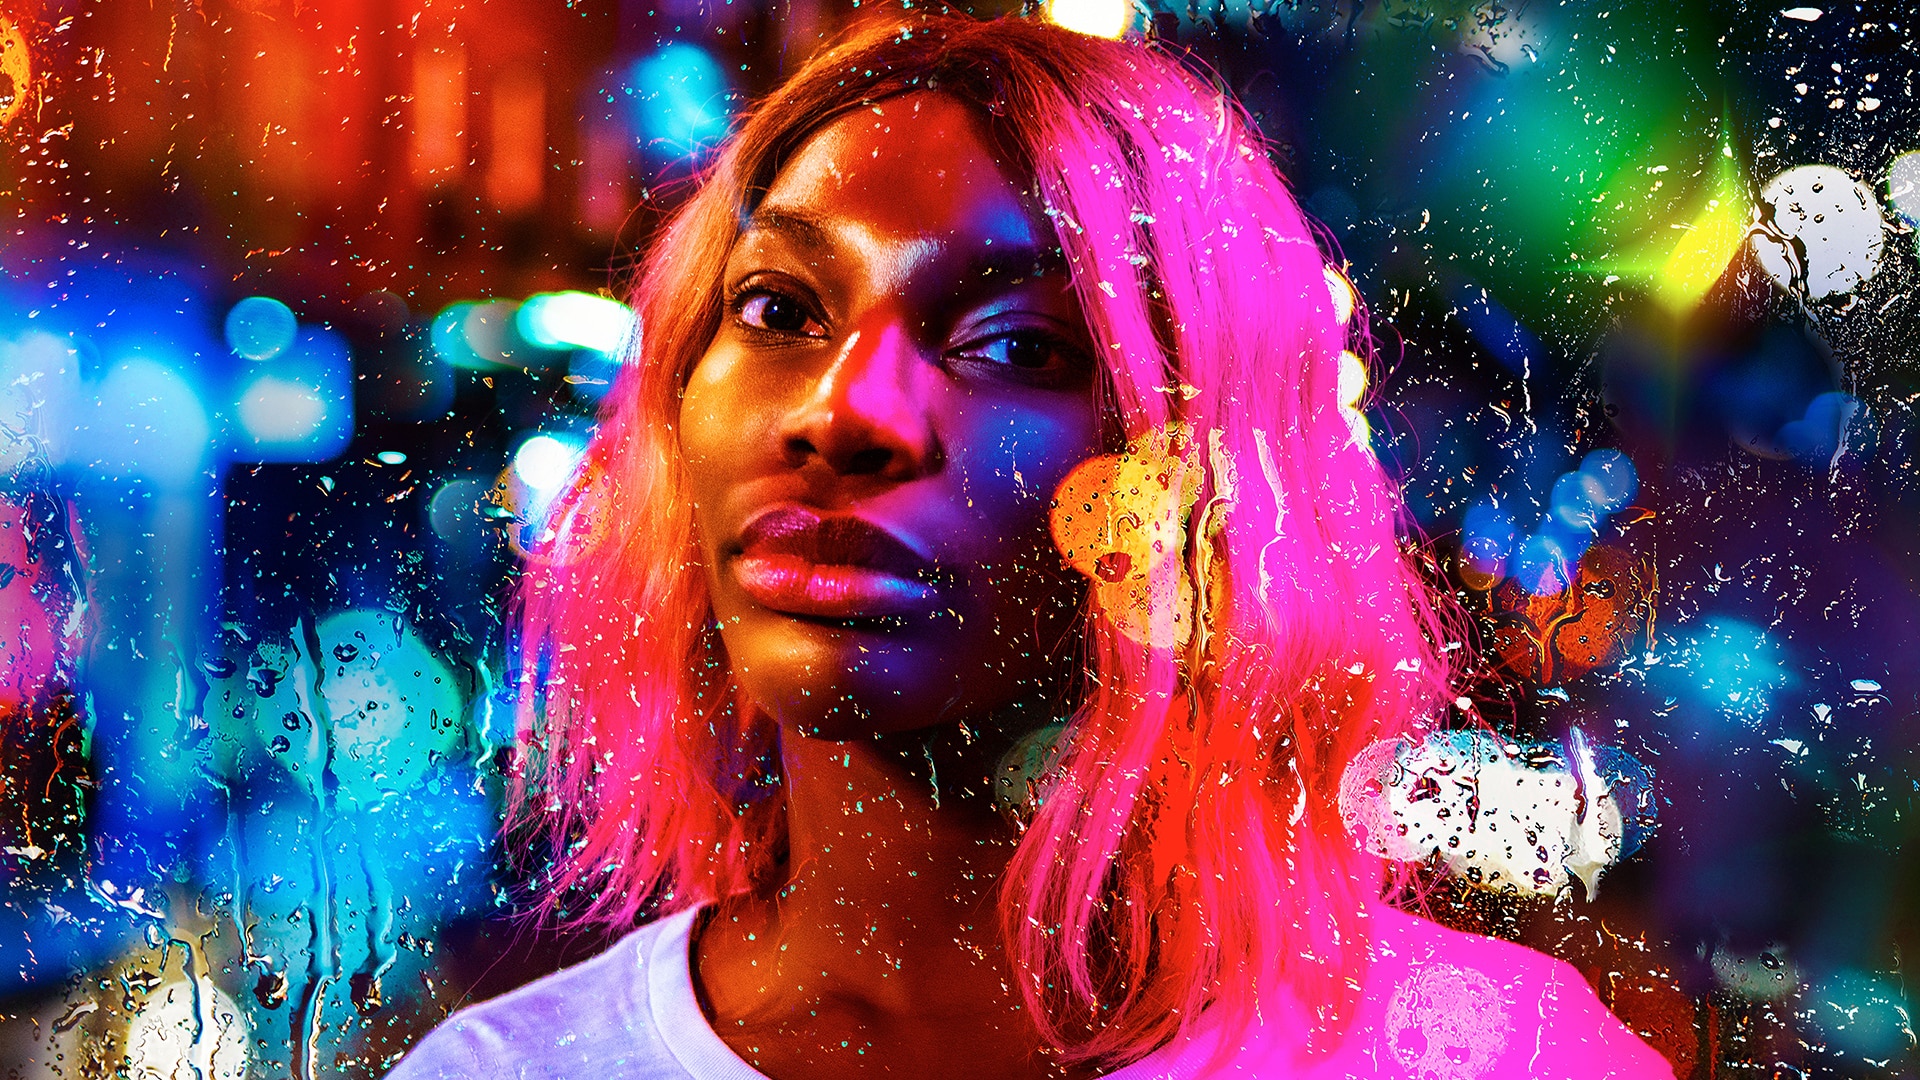 Michaela Coel Is Not Going Forward With A New Series In The 'I May Destroy You' Universe